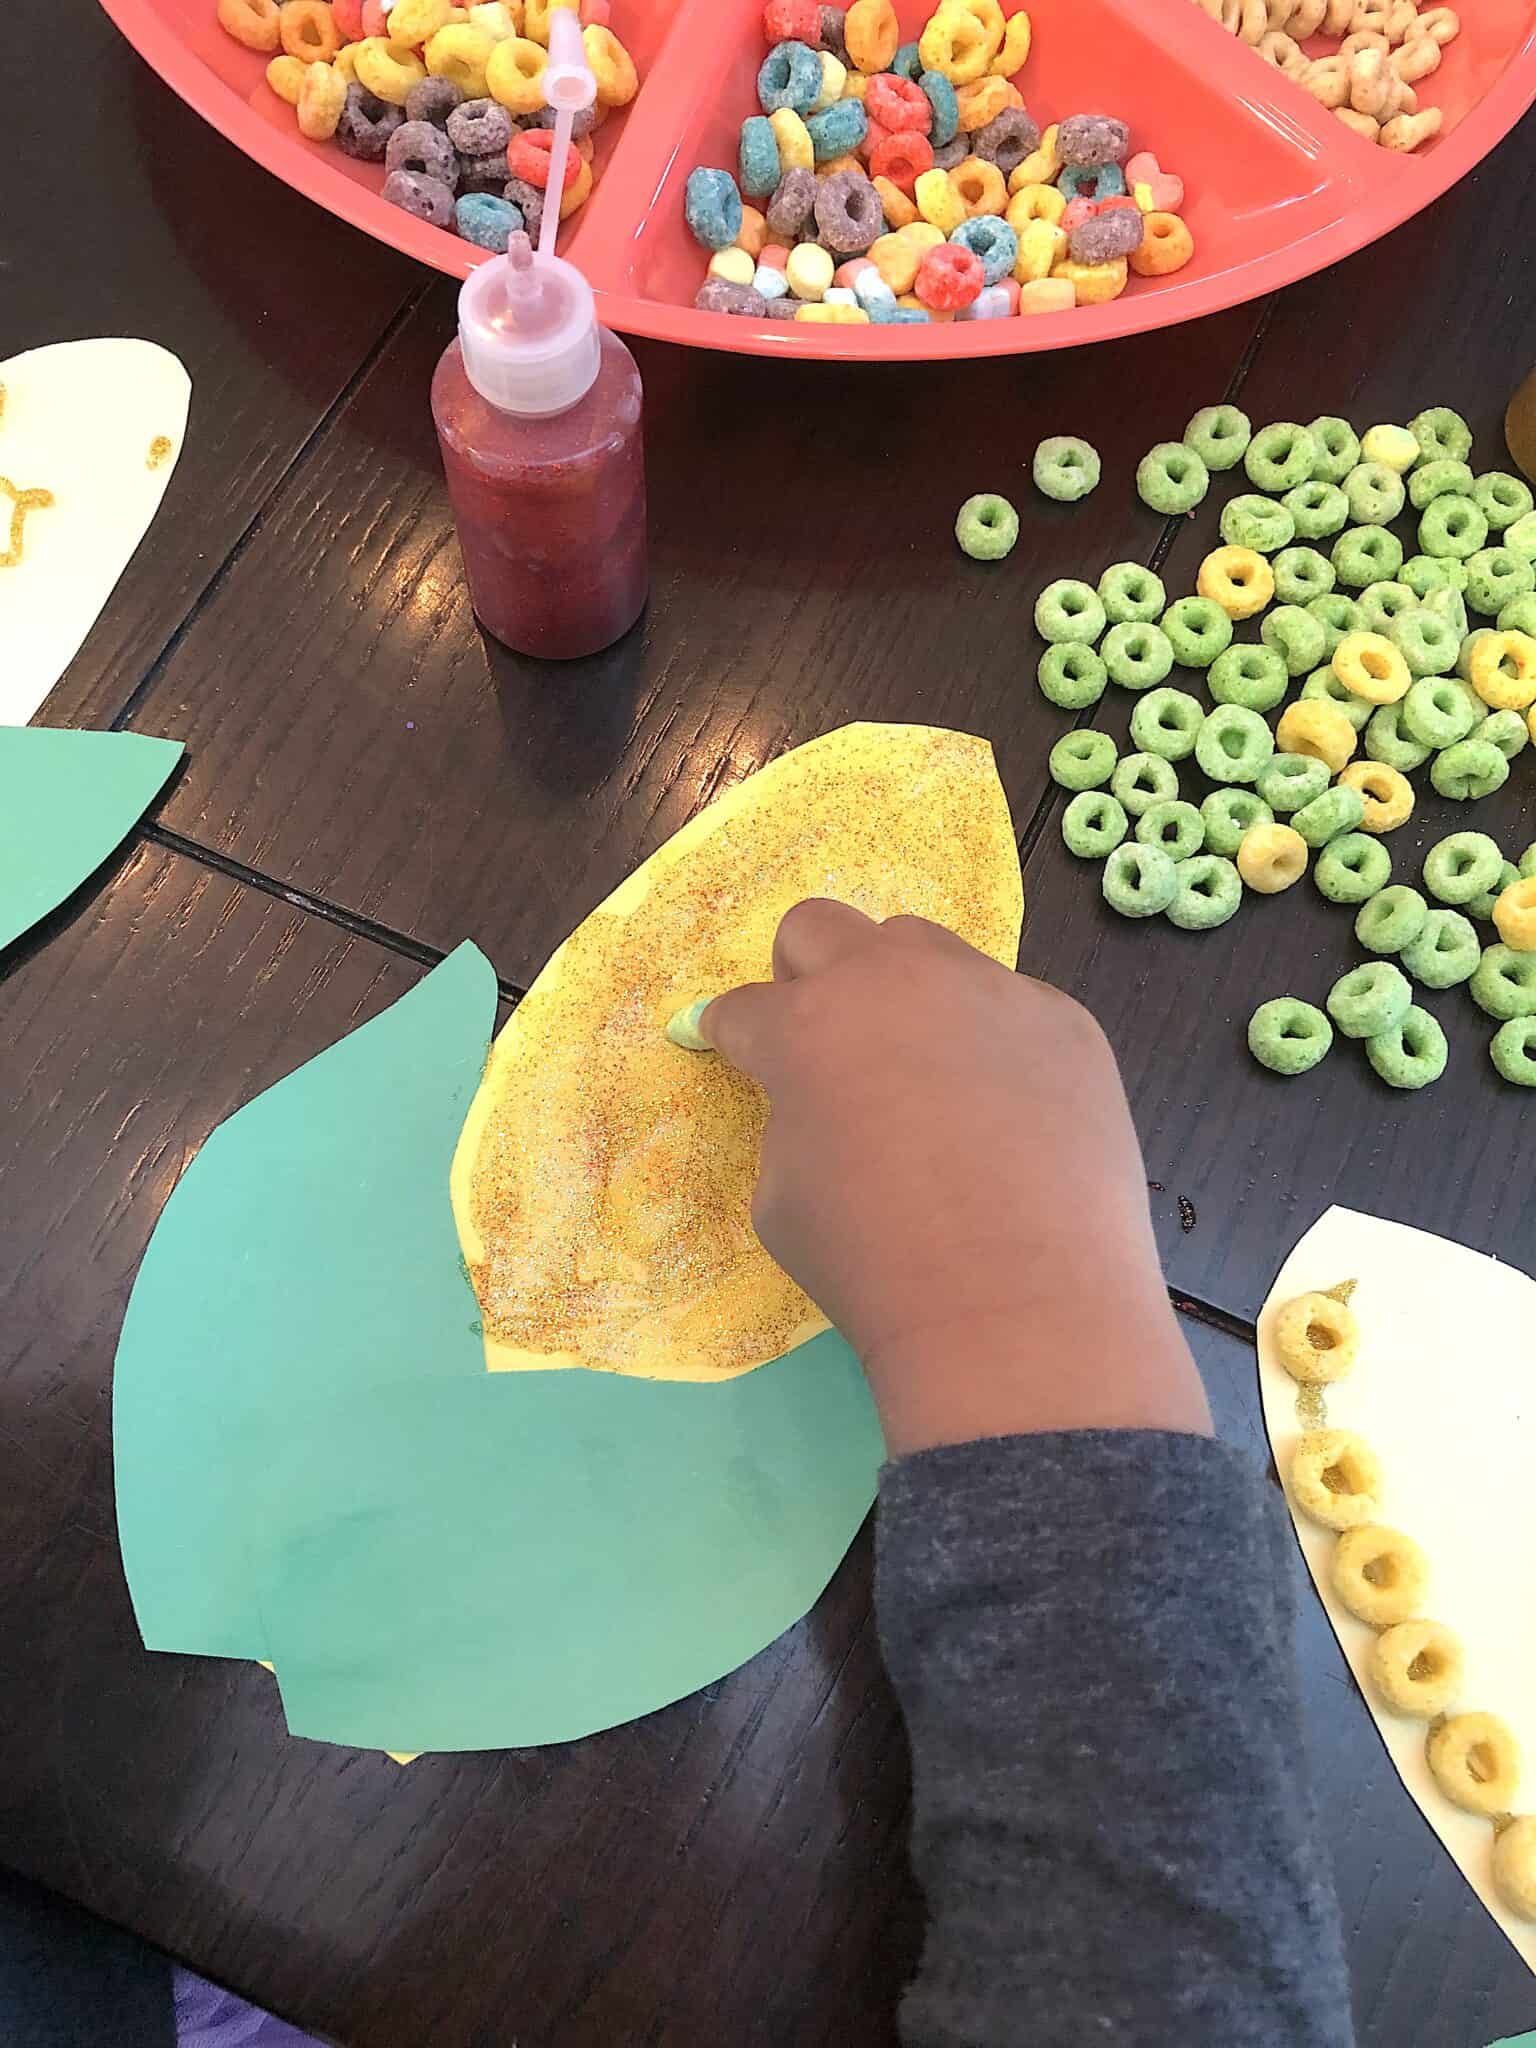 Looking for A Fun and Easy Corn Craft Preschoolers Will Love? Well Check Out This Awesome Fall Craft That Will Keep Your Child Occupied for The Season! #fallcraftsforkids #corncraft #thanksgivingcraft